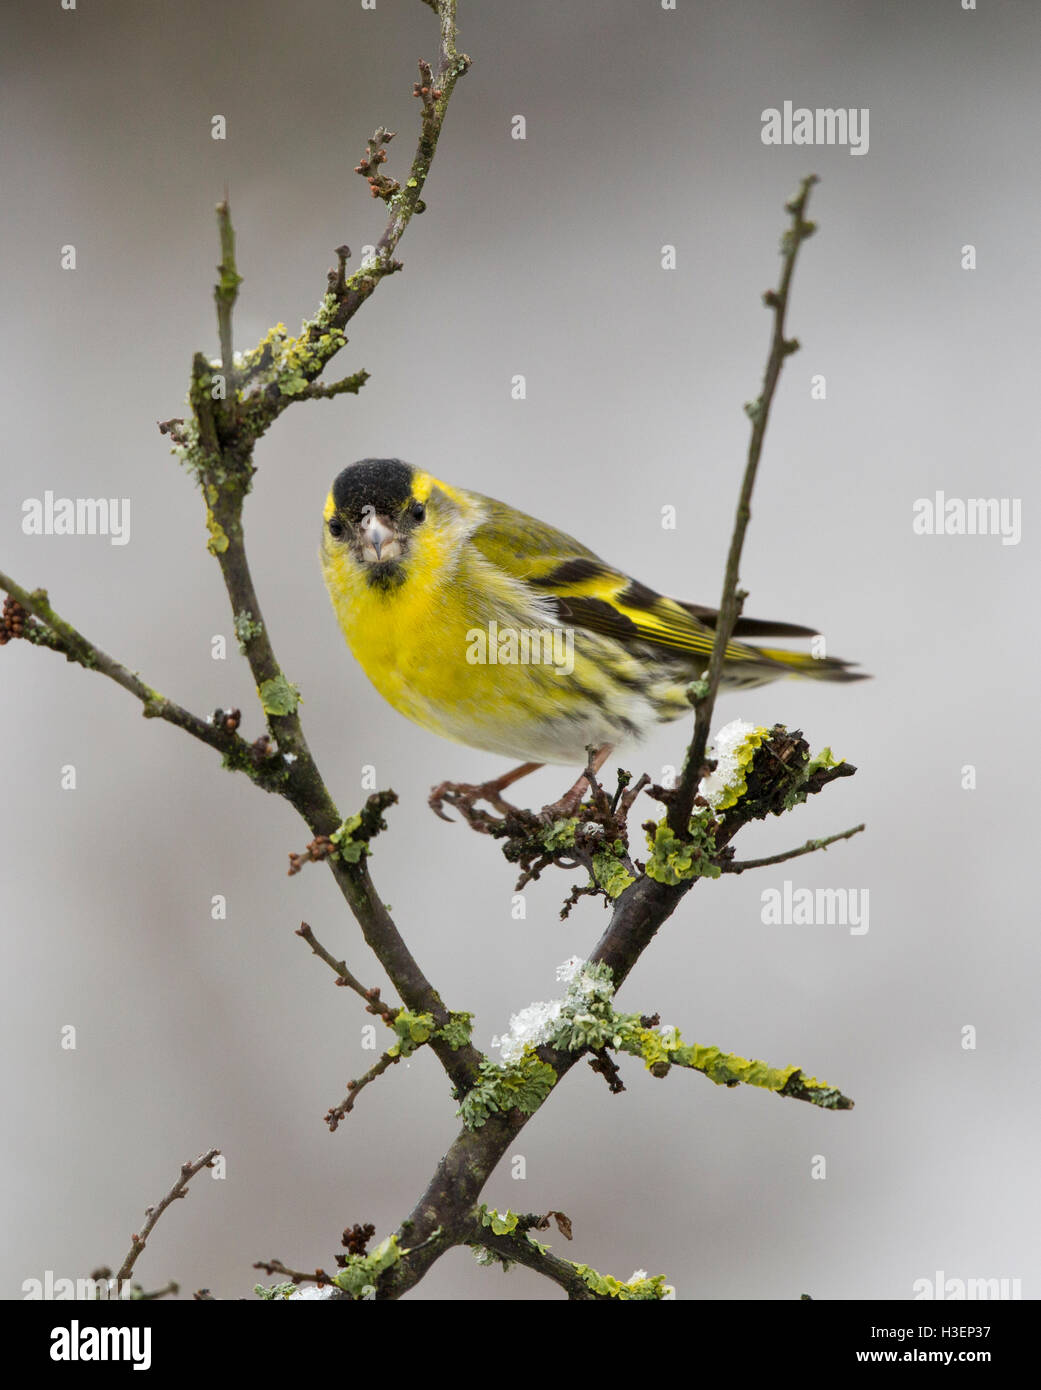 Siskin, Carduelis spinus, on a branch in winter, Welsh borders, UK Stock Photo